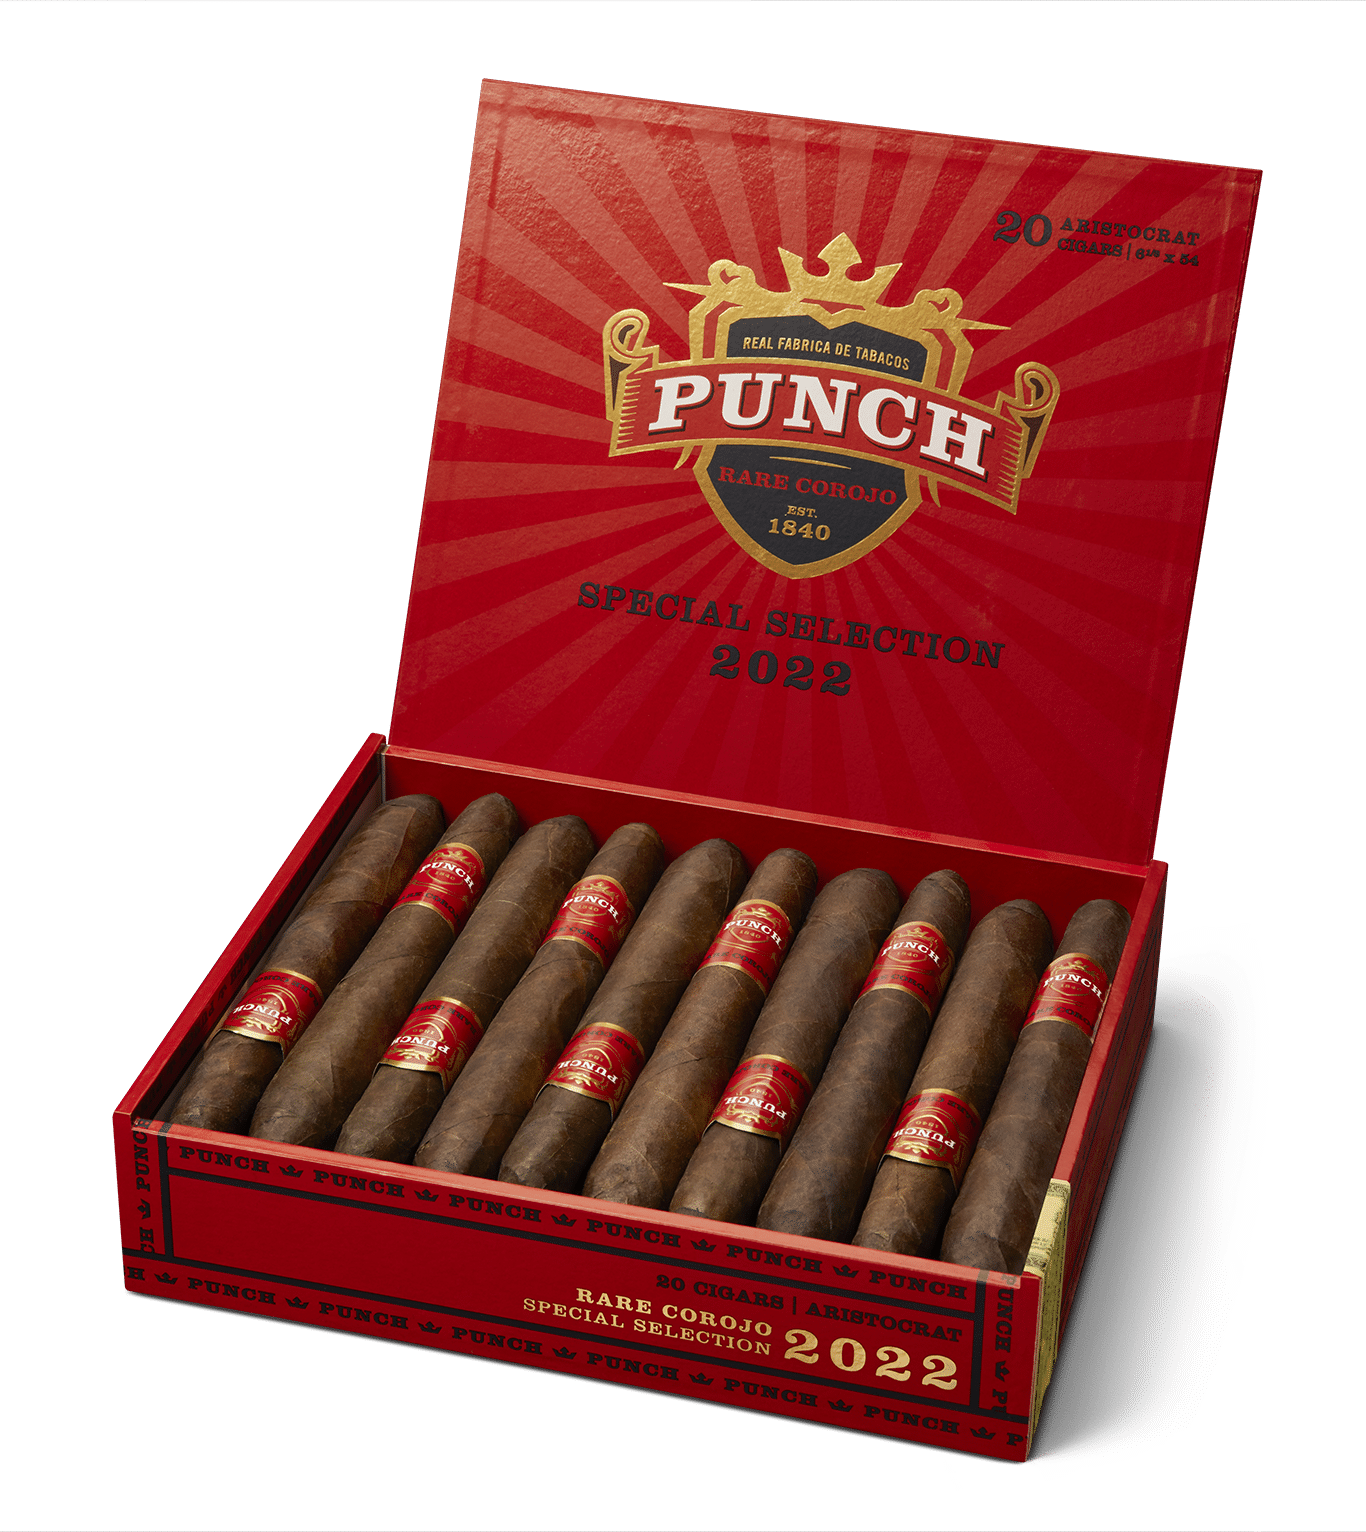 Punch Brings Back Former Size of Rare Corojo - Cigar News - Blind Man's Puff